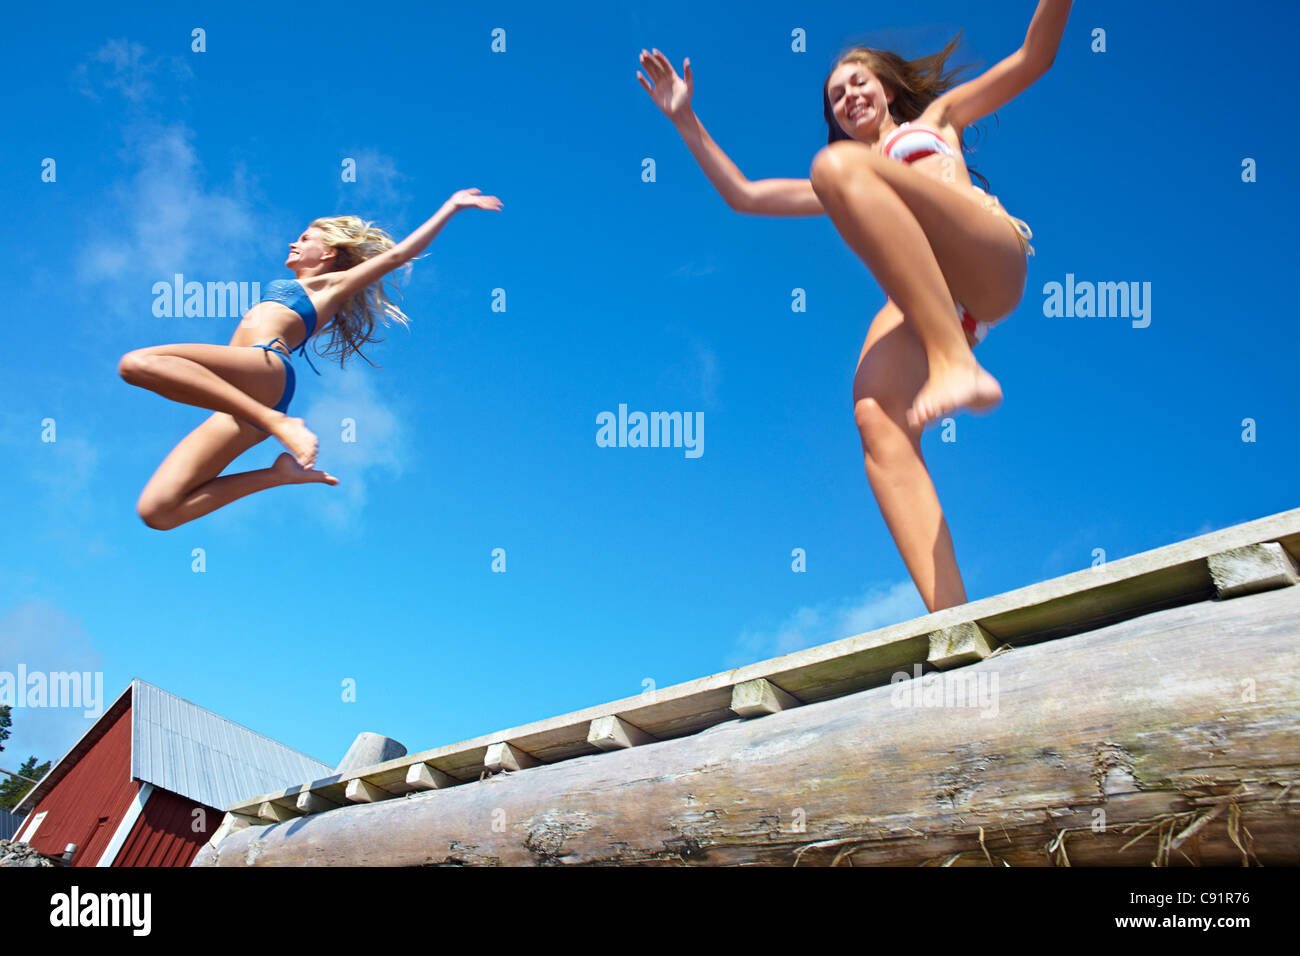 Jumping Topless